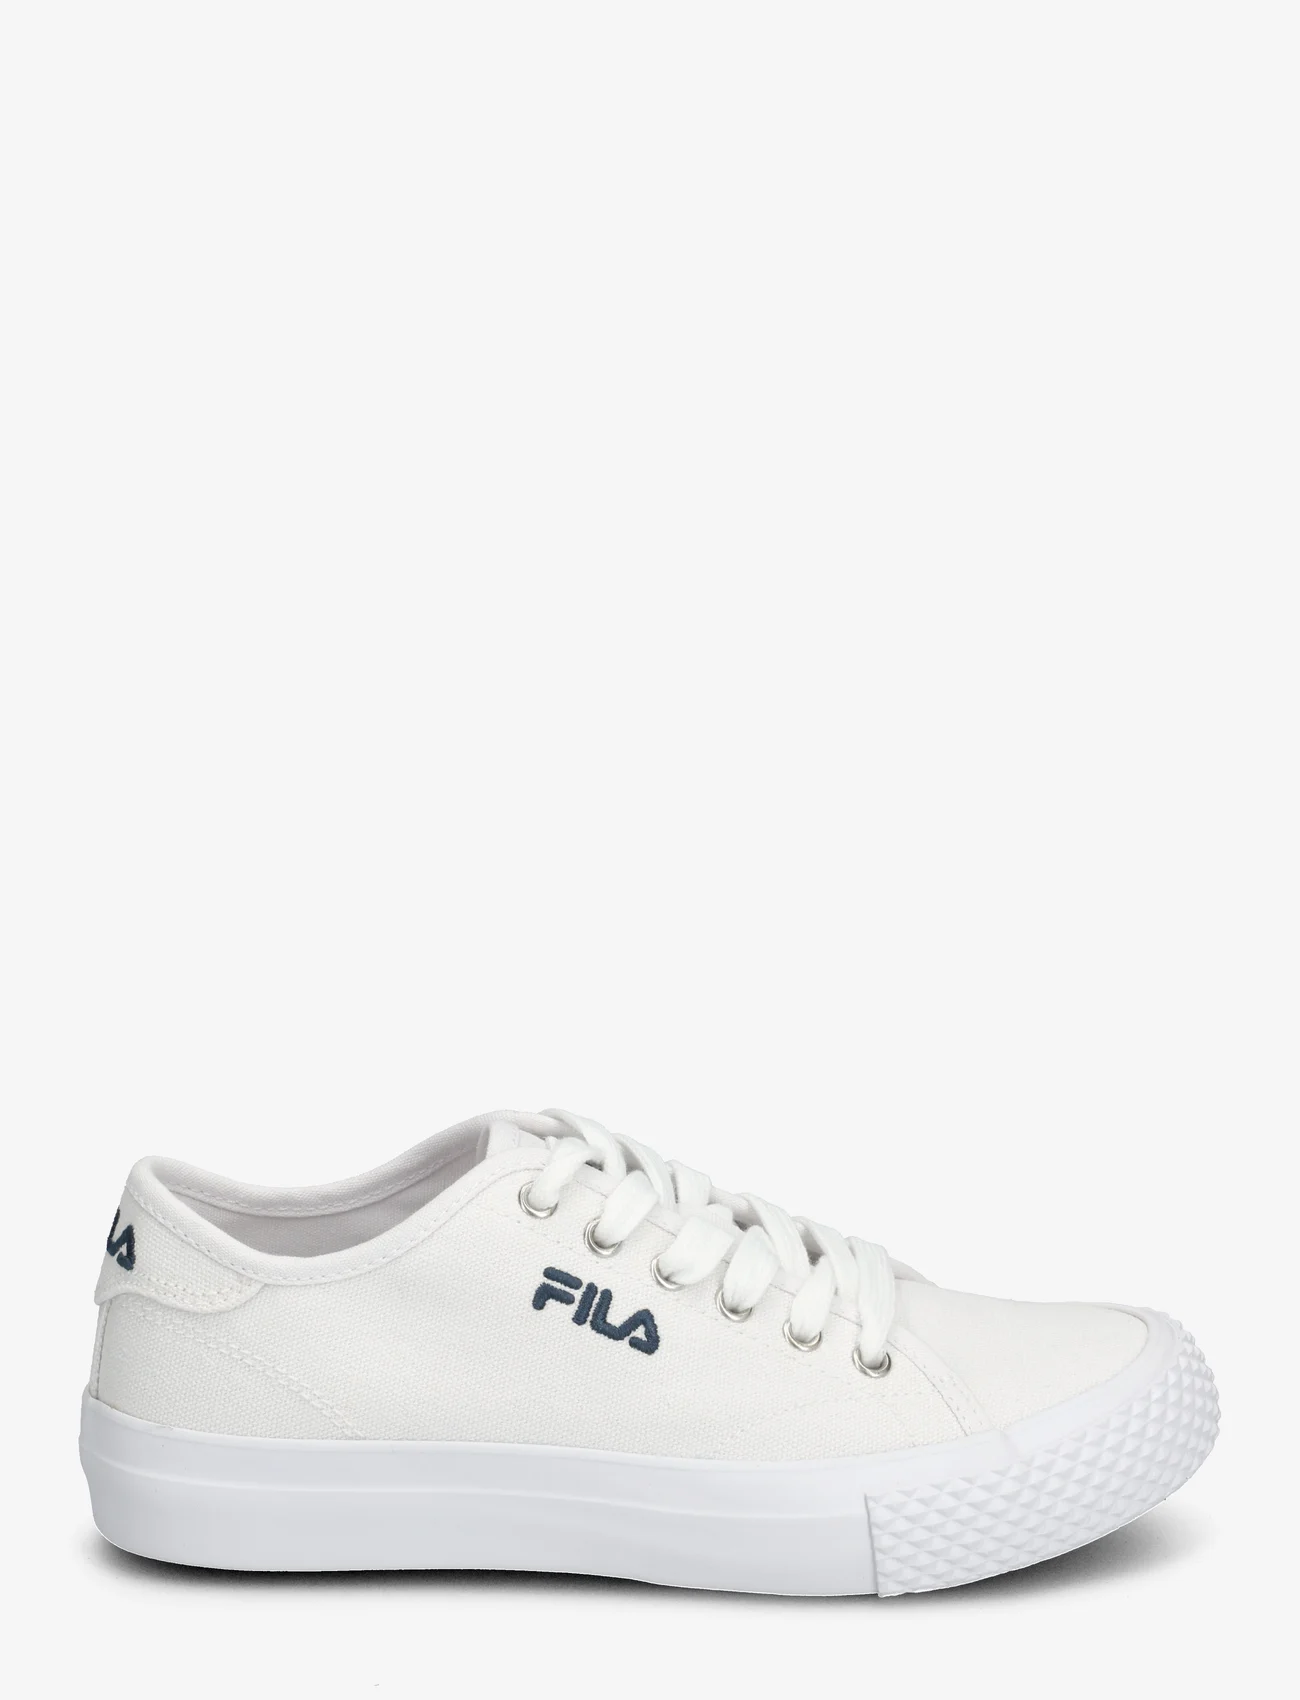 FILA - POINTER CLASSIC teens - canvas sneakers - white - 1